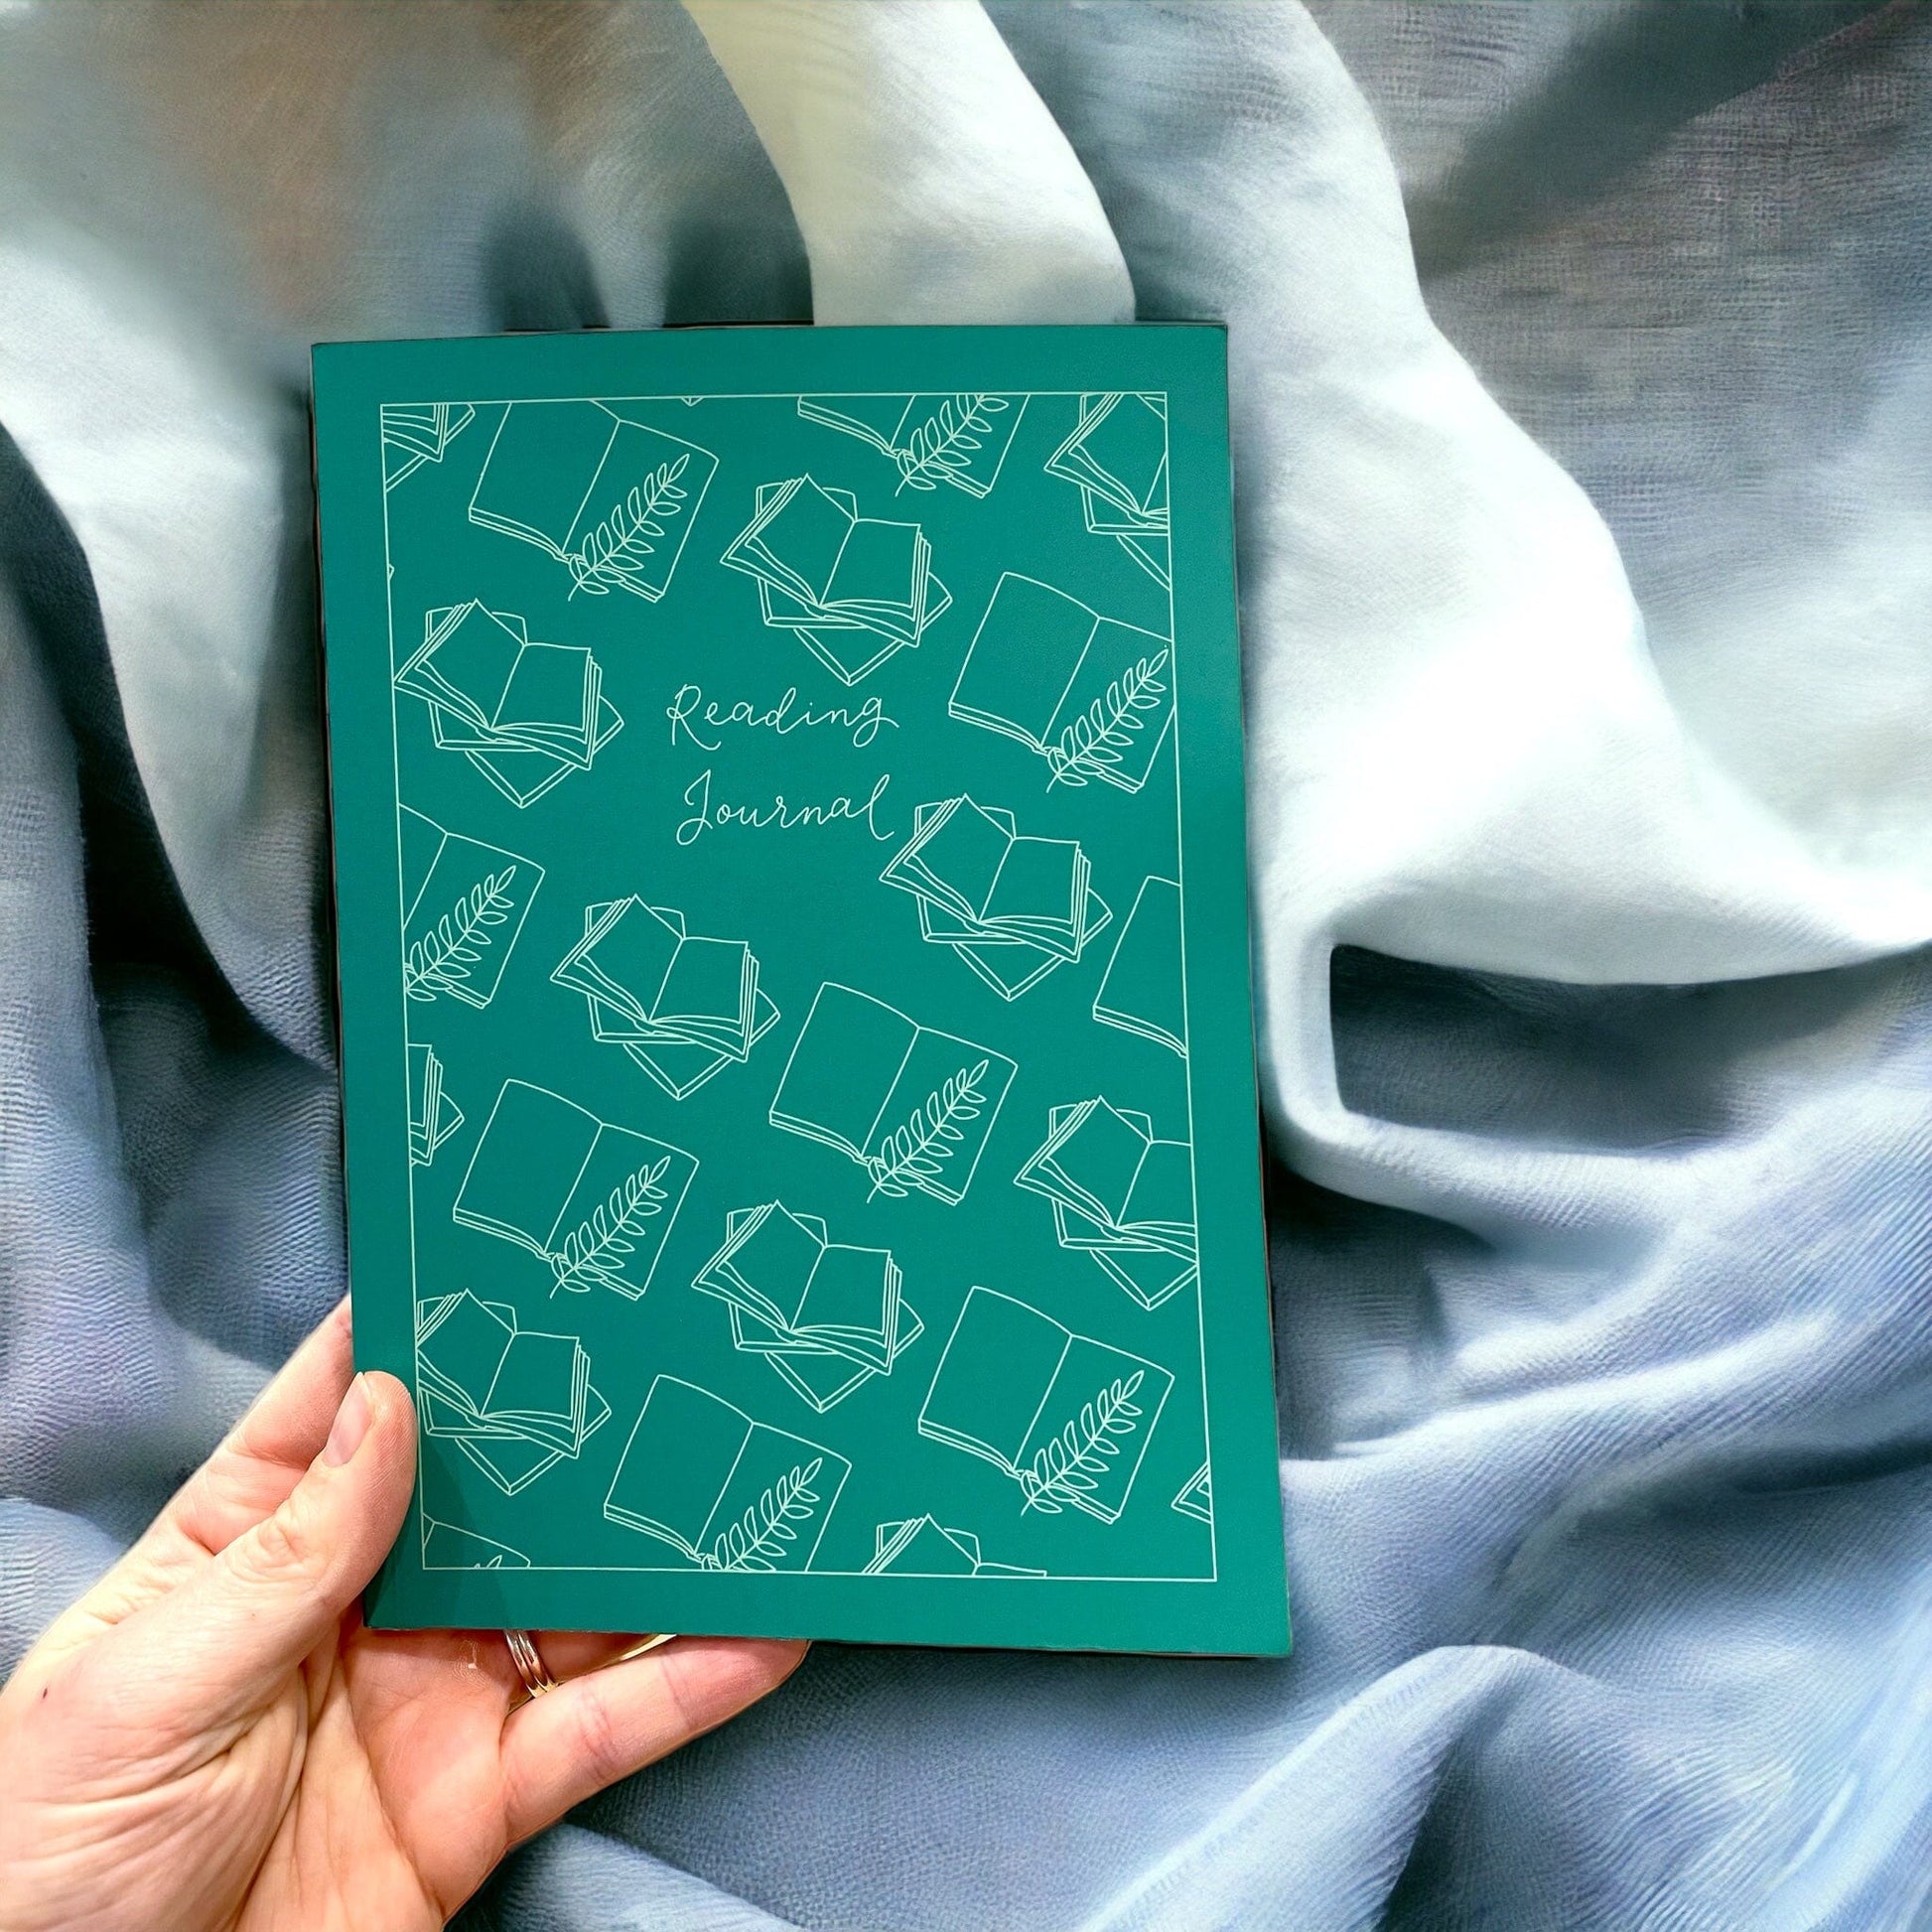 Reading journal Notebook And Hope Designs Teal Green  